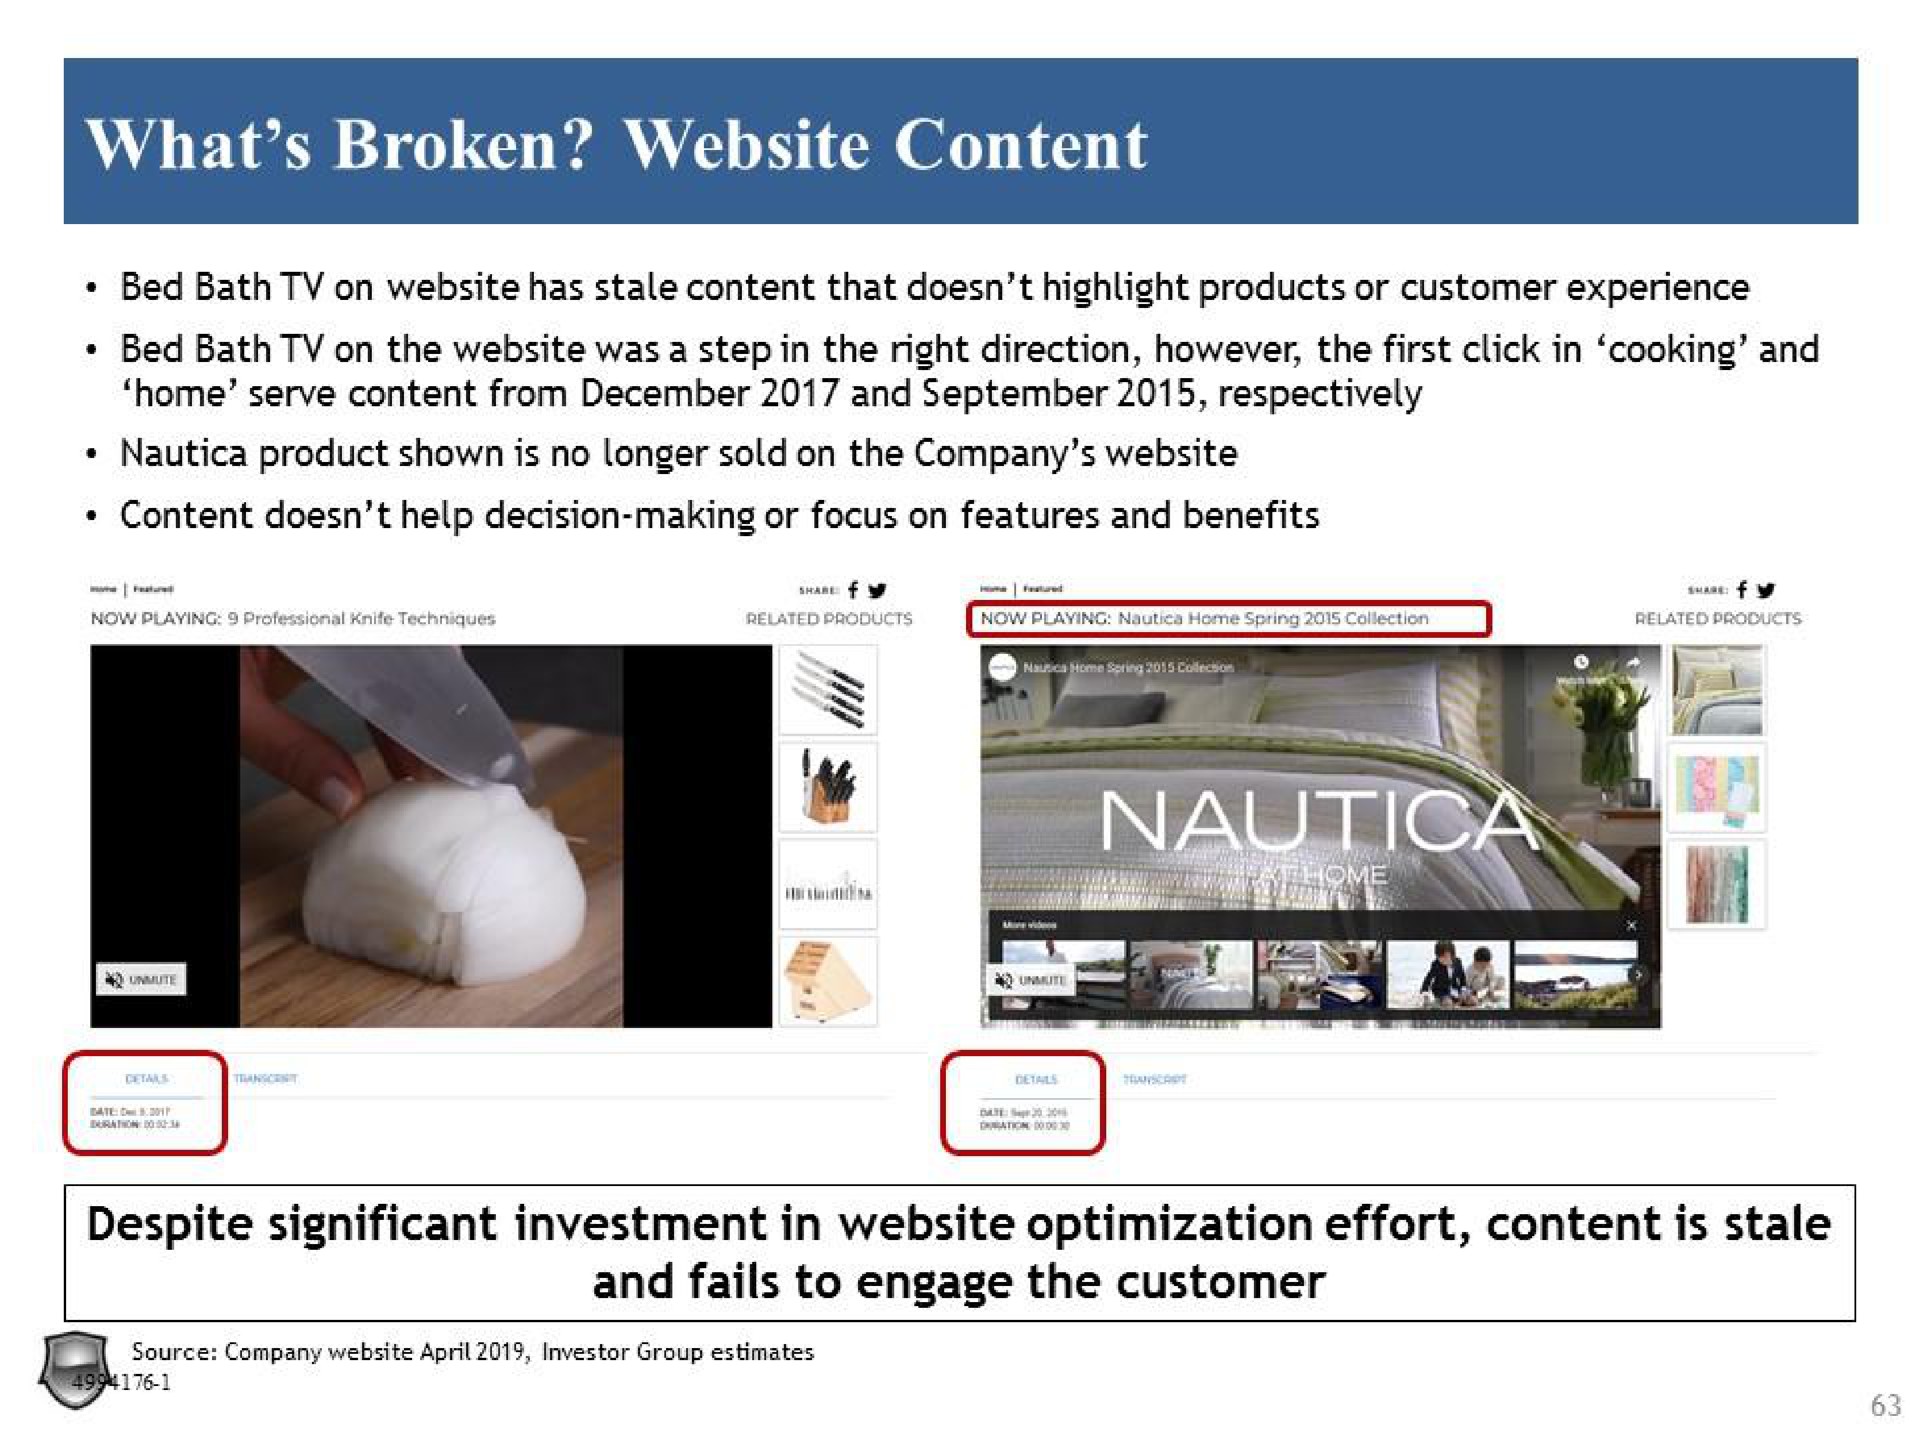 what broken content despite significant investment in optimization effort content is stale and fails to engage the customer | Legion Partners